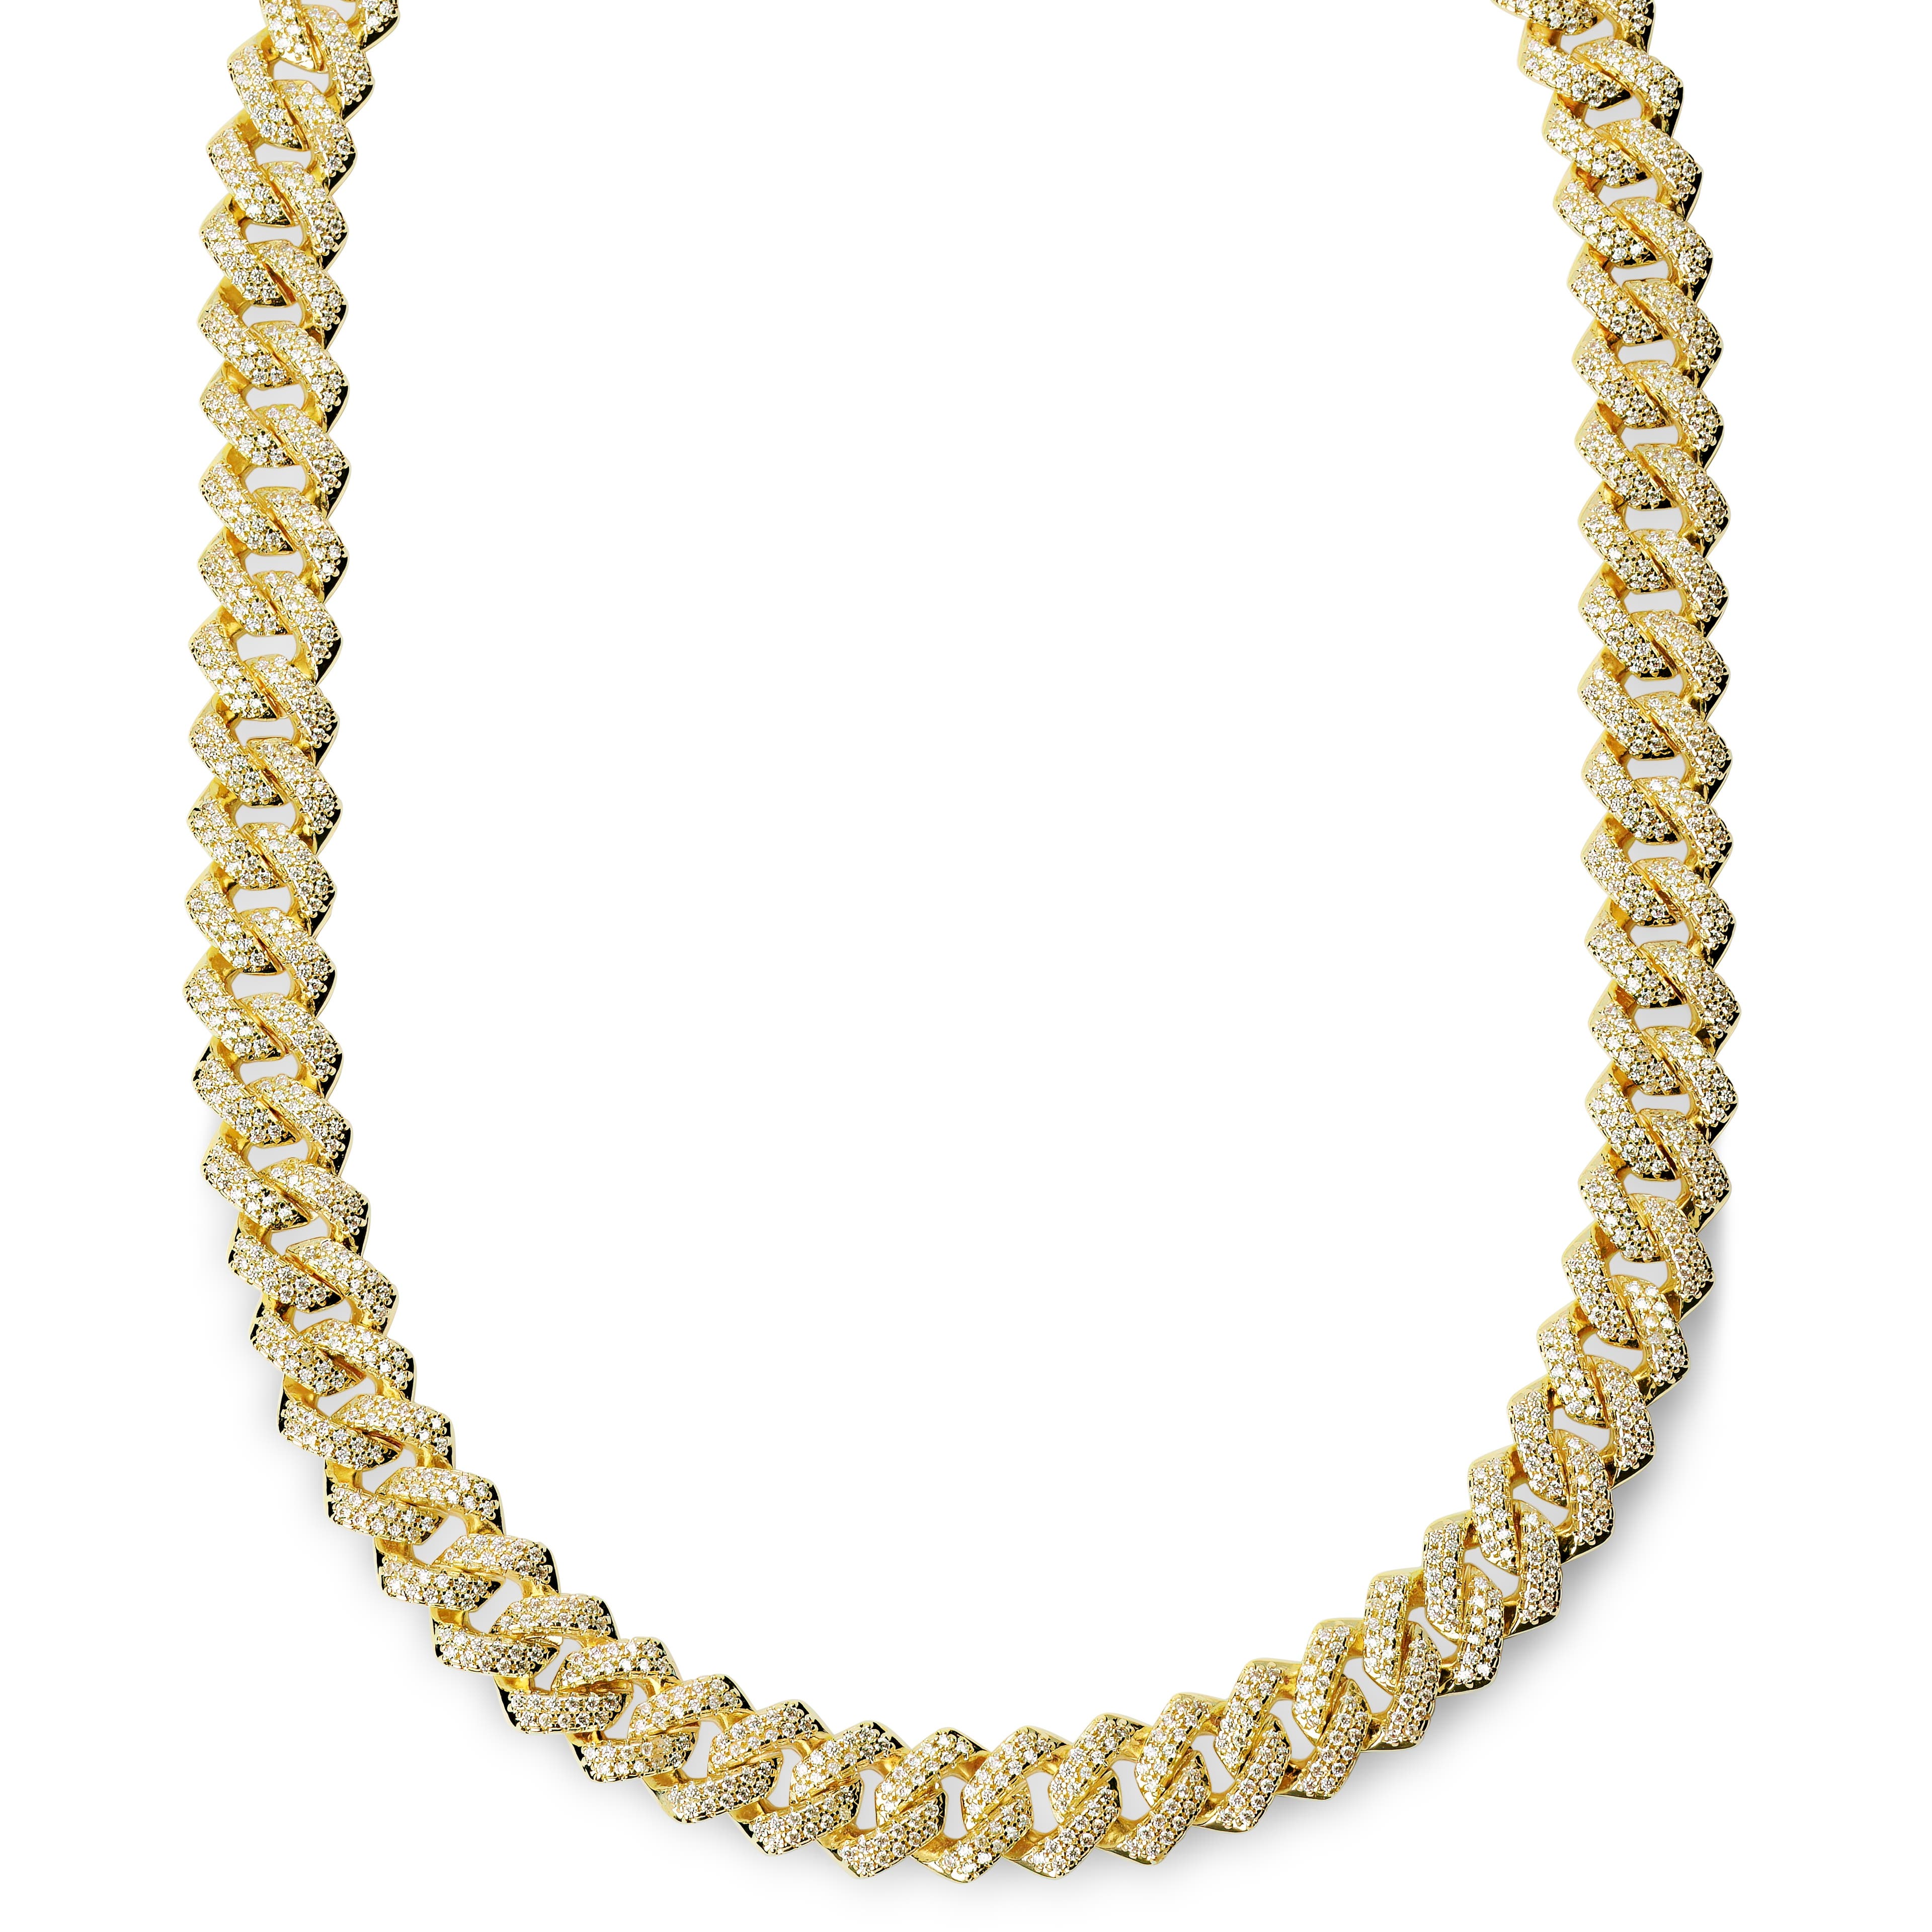 Nicos | 1/2" (12 mm) Iced Gold-tone Diamond Prong Link Chain Zirconia Necklace